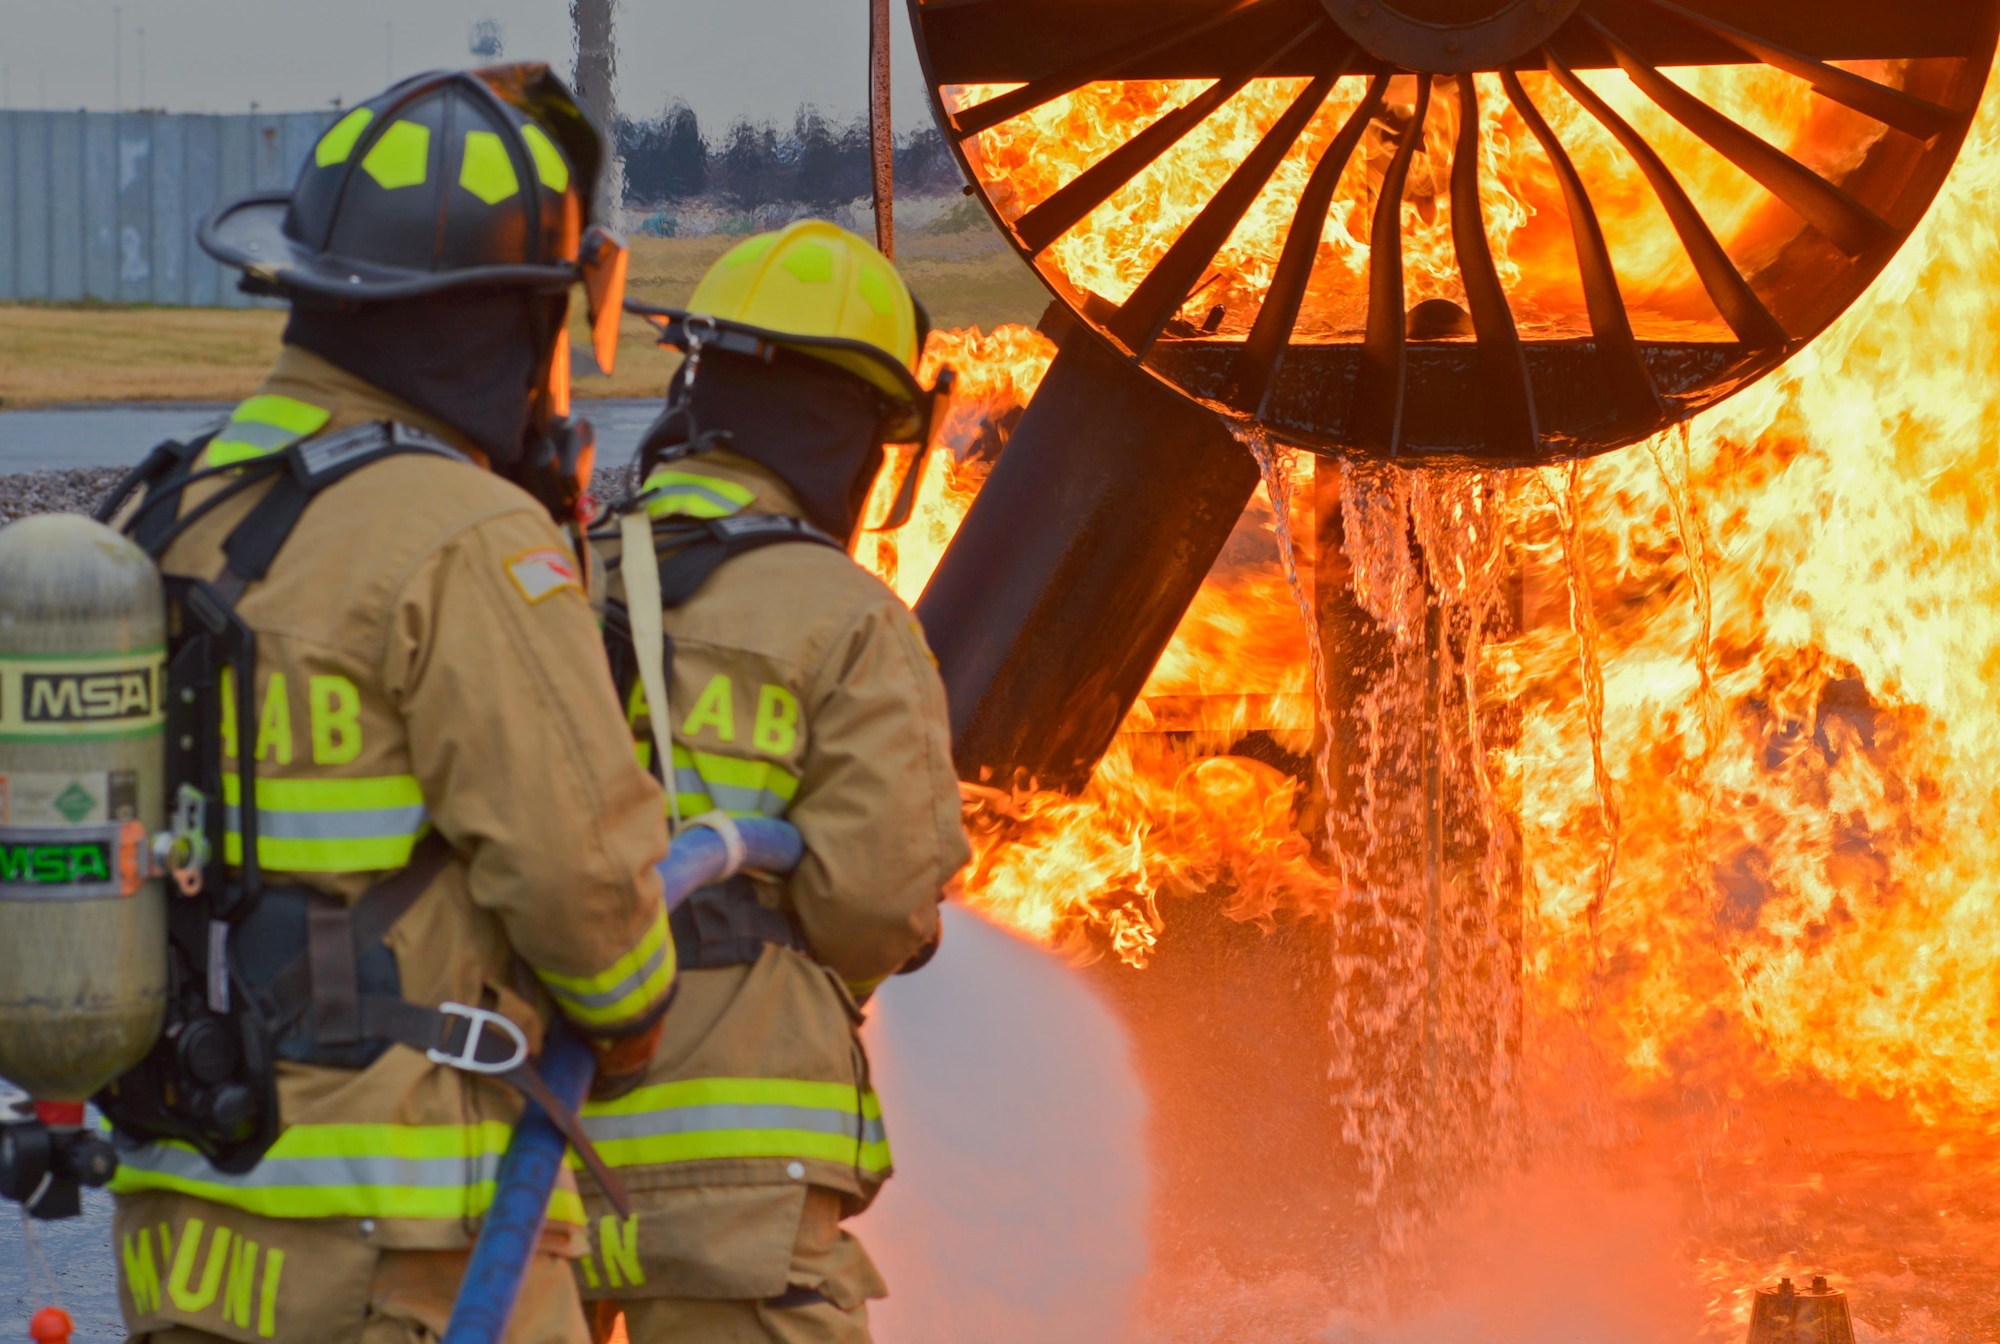 Two firefighters with the 374th Civil Engineer Squadron put out a simulated aircraft fire during a training scenario at Yokota Air Base, Japan, Dec. 14, 2016. During the training the firefighters were split into three teams of two, with two teams extinguishing the fires and the remaining team on standby providing a safety line to help the primary teams. (U.S. Air Force photo by Staff Sgt. David Owsianka)